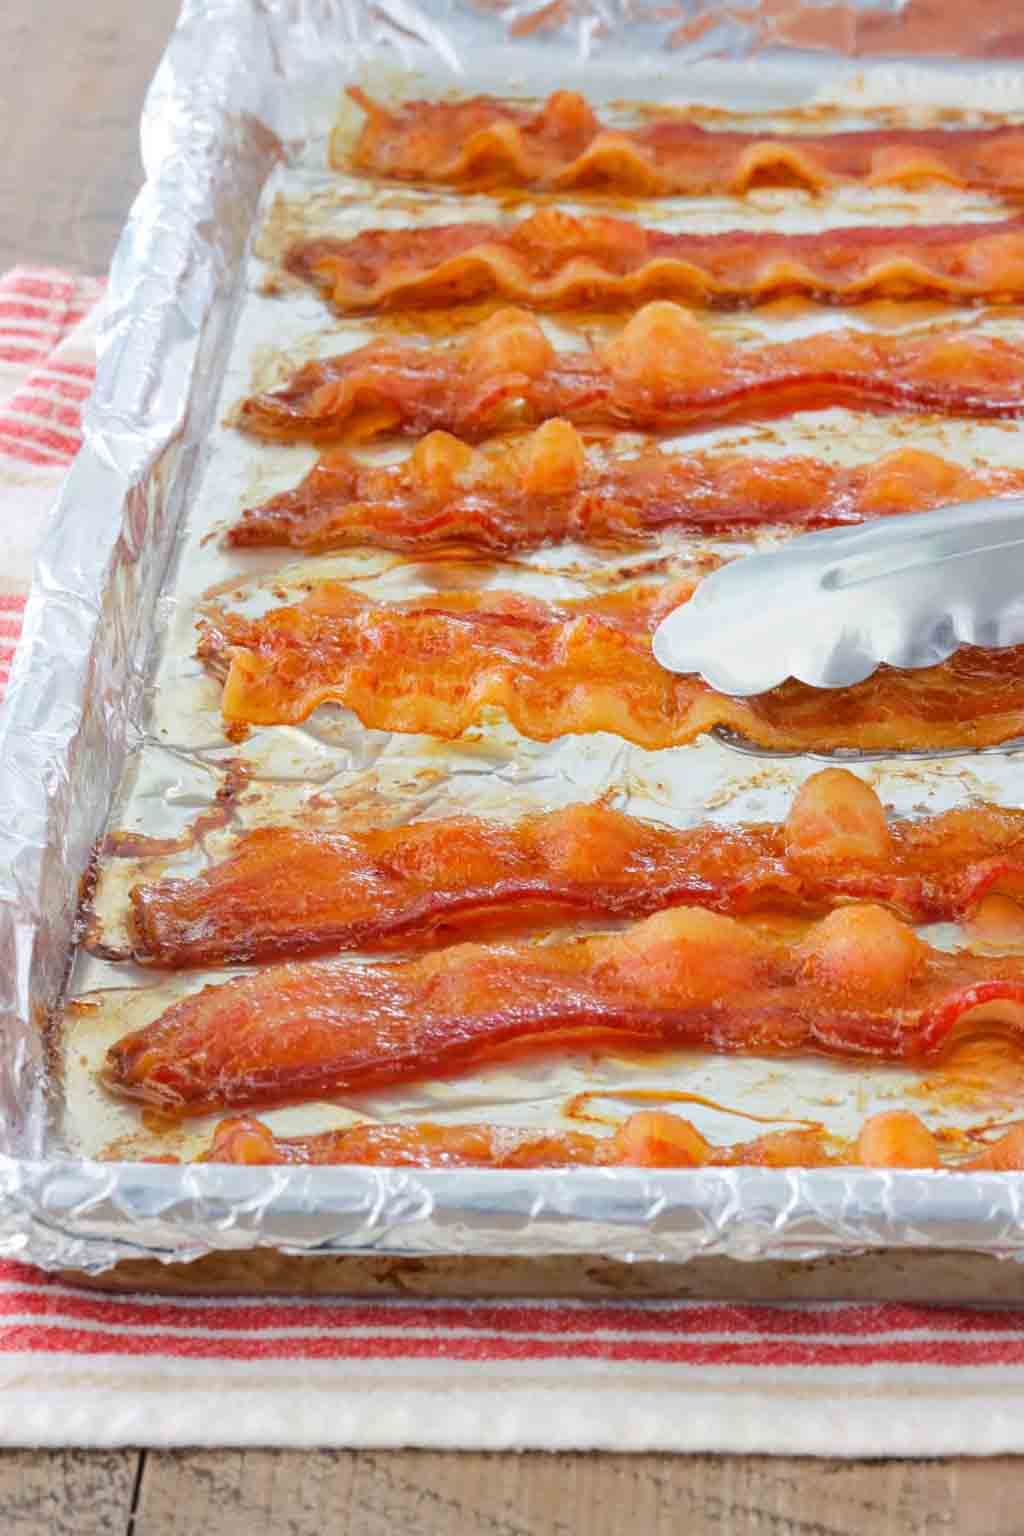 Laying out bacon strips in a single layer